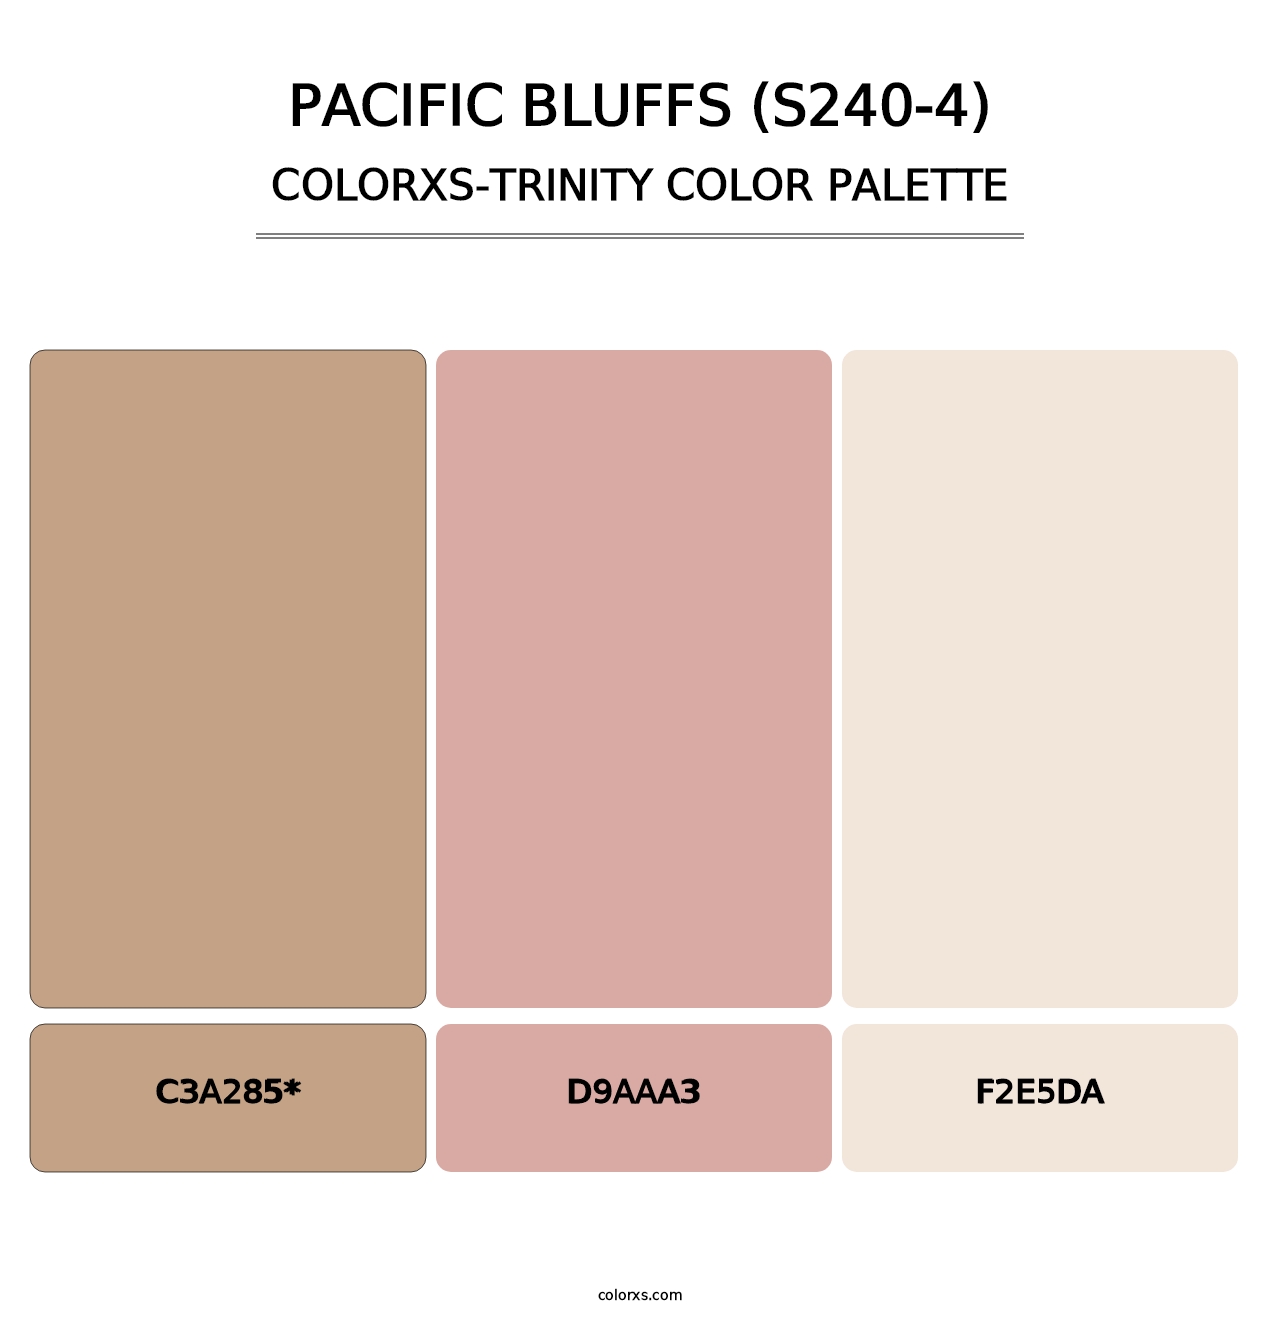 Pacific Bluffs (S240-4) - Colorxs Trinity Palette